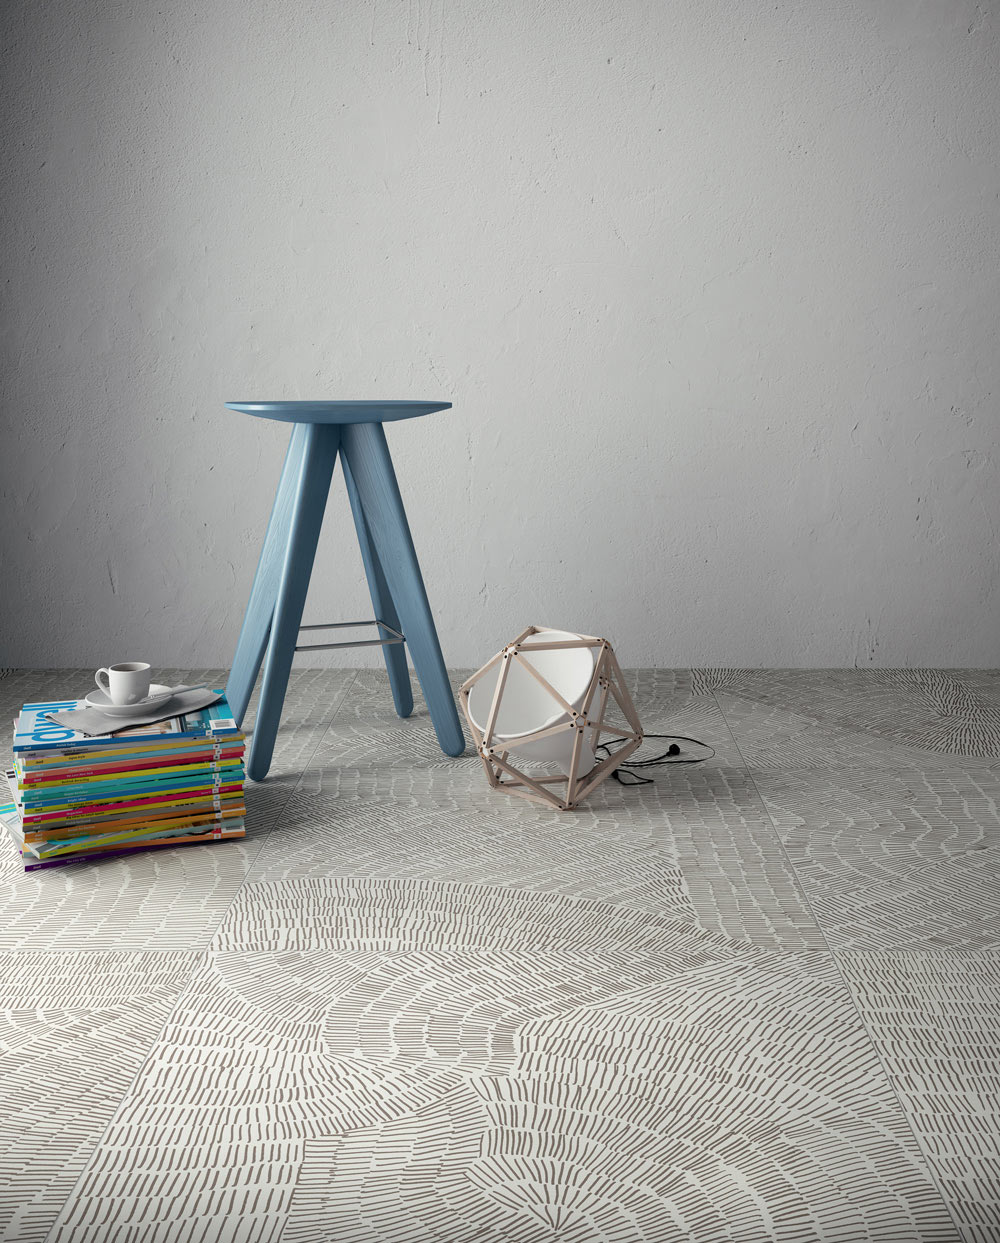 Fossil: Tiles Inspired by Prehistoric Imprints on Rock Formations